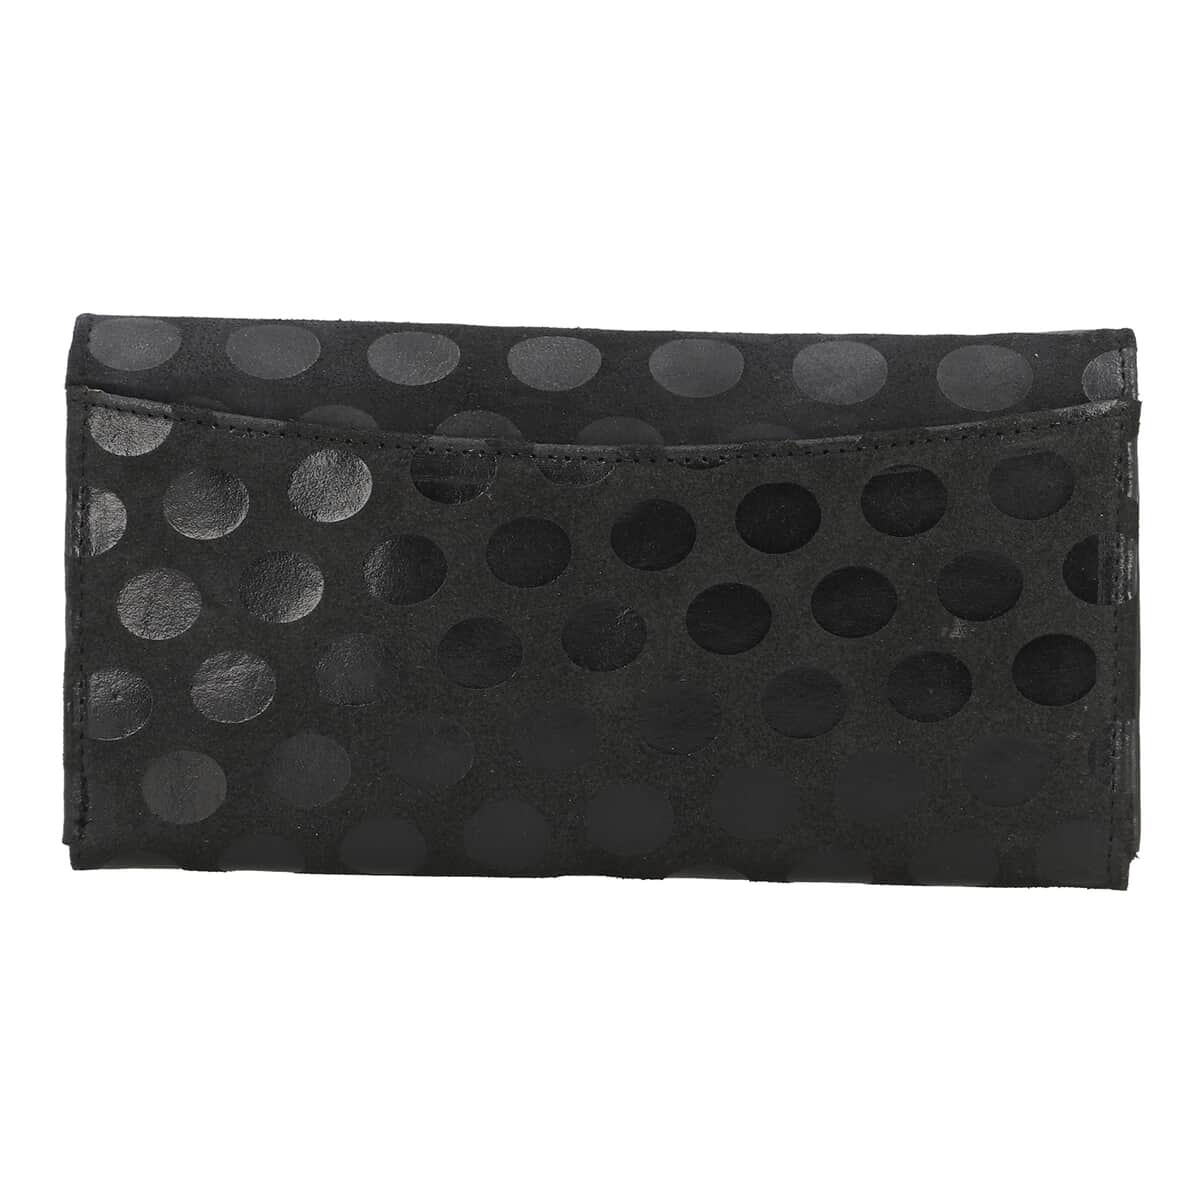 UNION CODE Black Genuine Leather RFID Women's Wallet (7.5"x4.5") image number 4